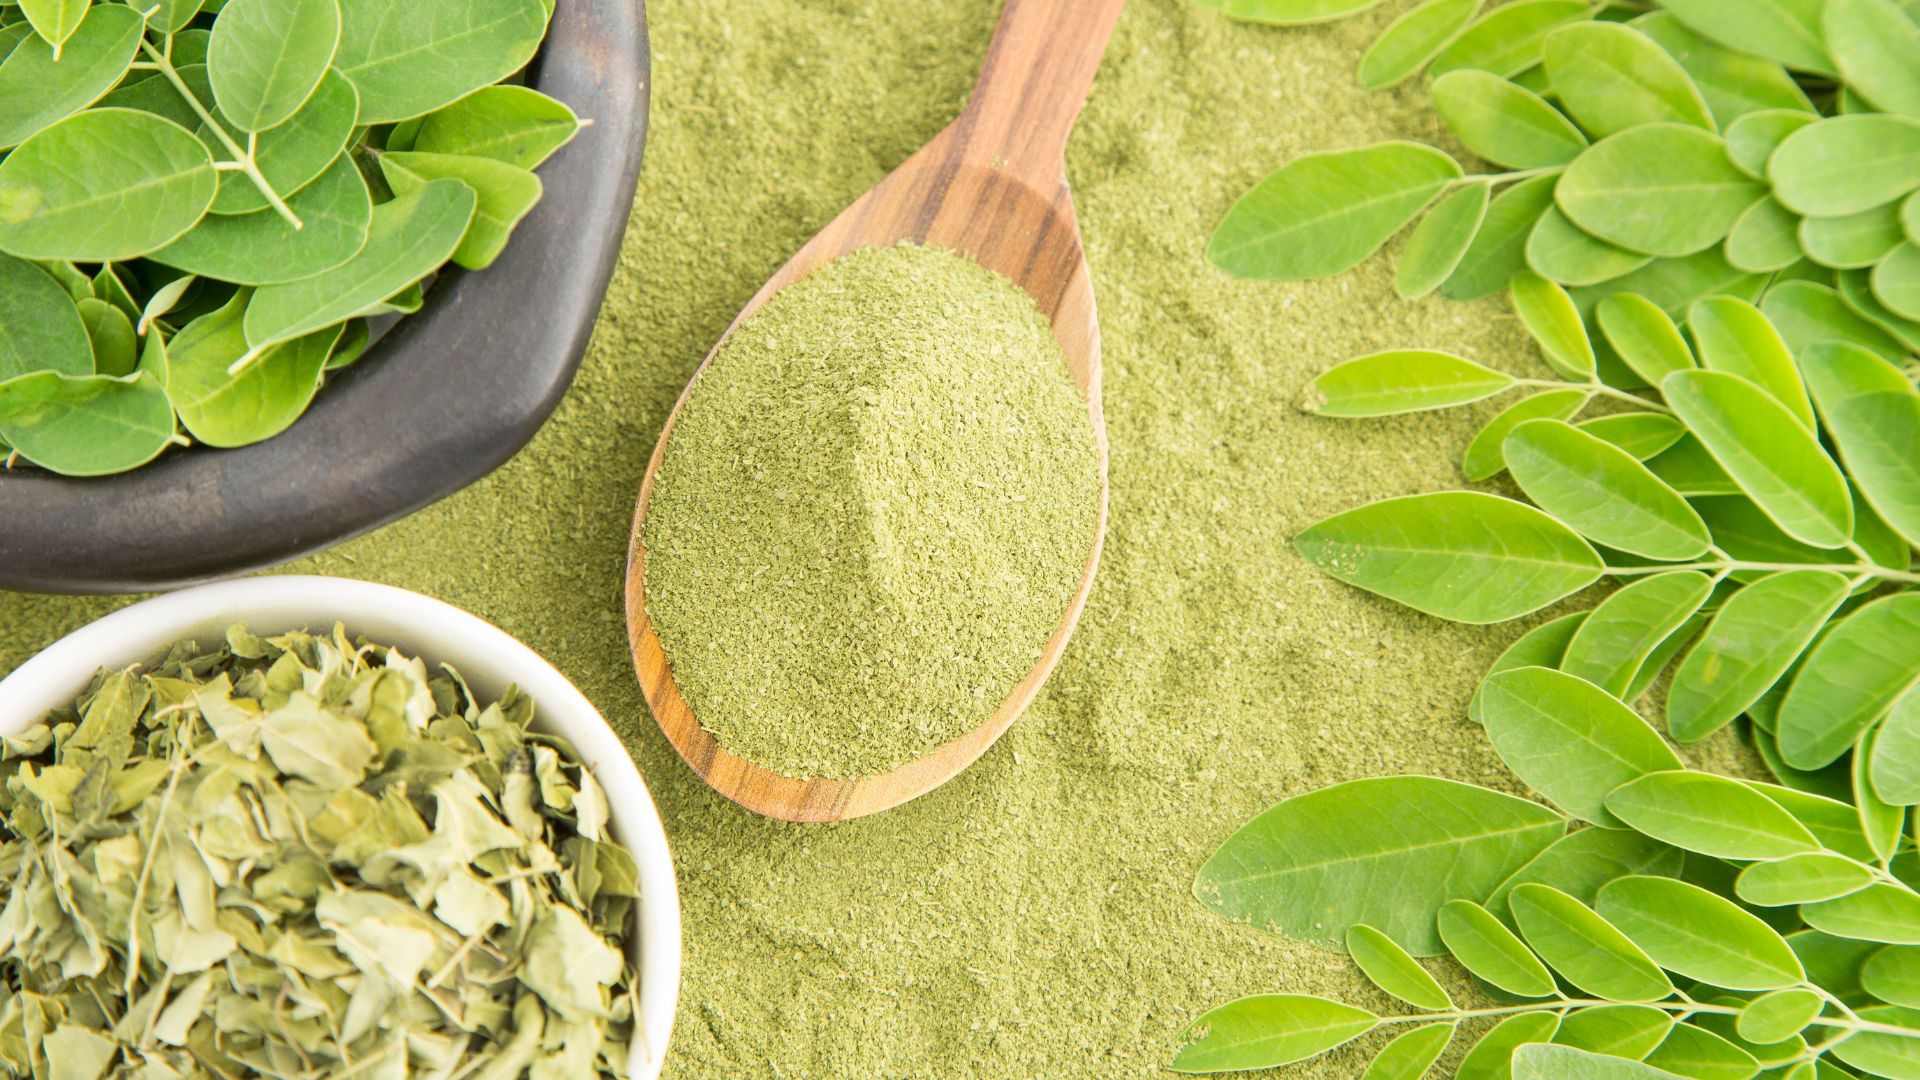 Moringa Leaf Powder: The Superfood for Your Skin